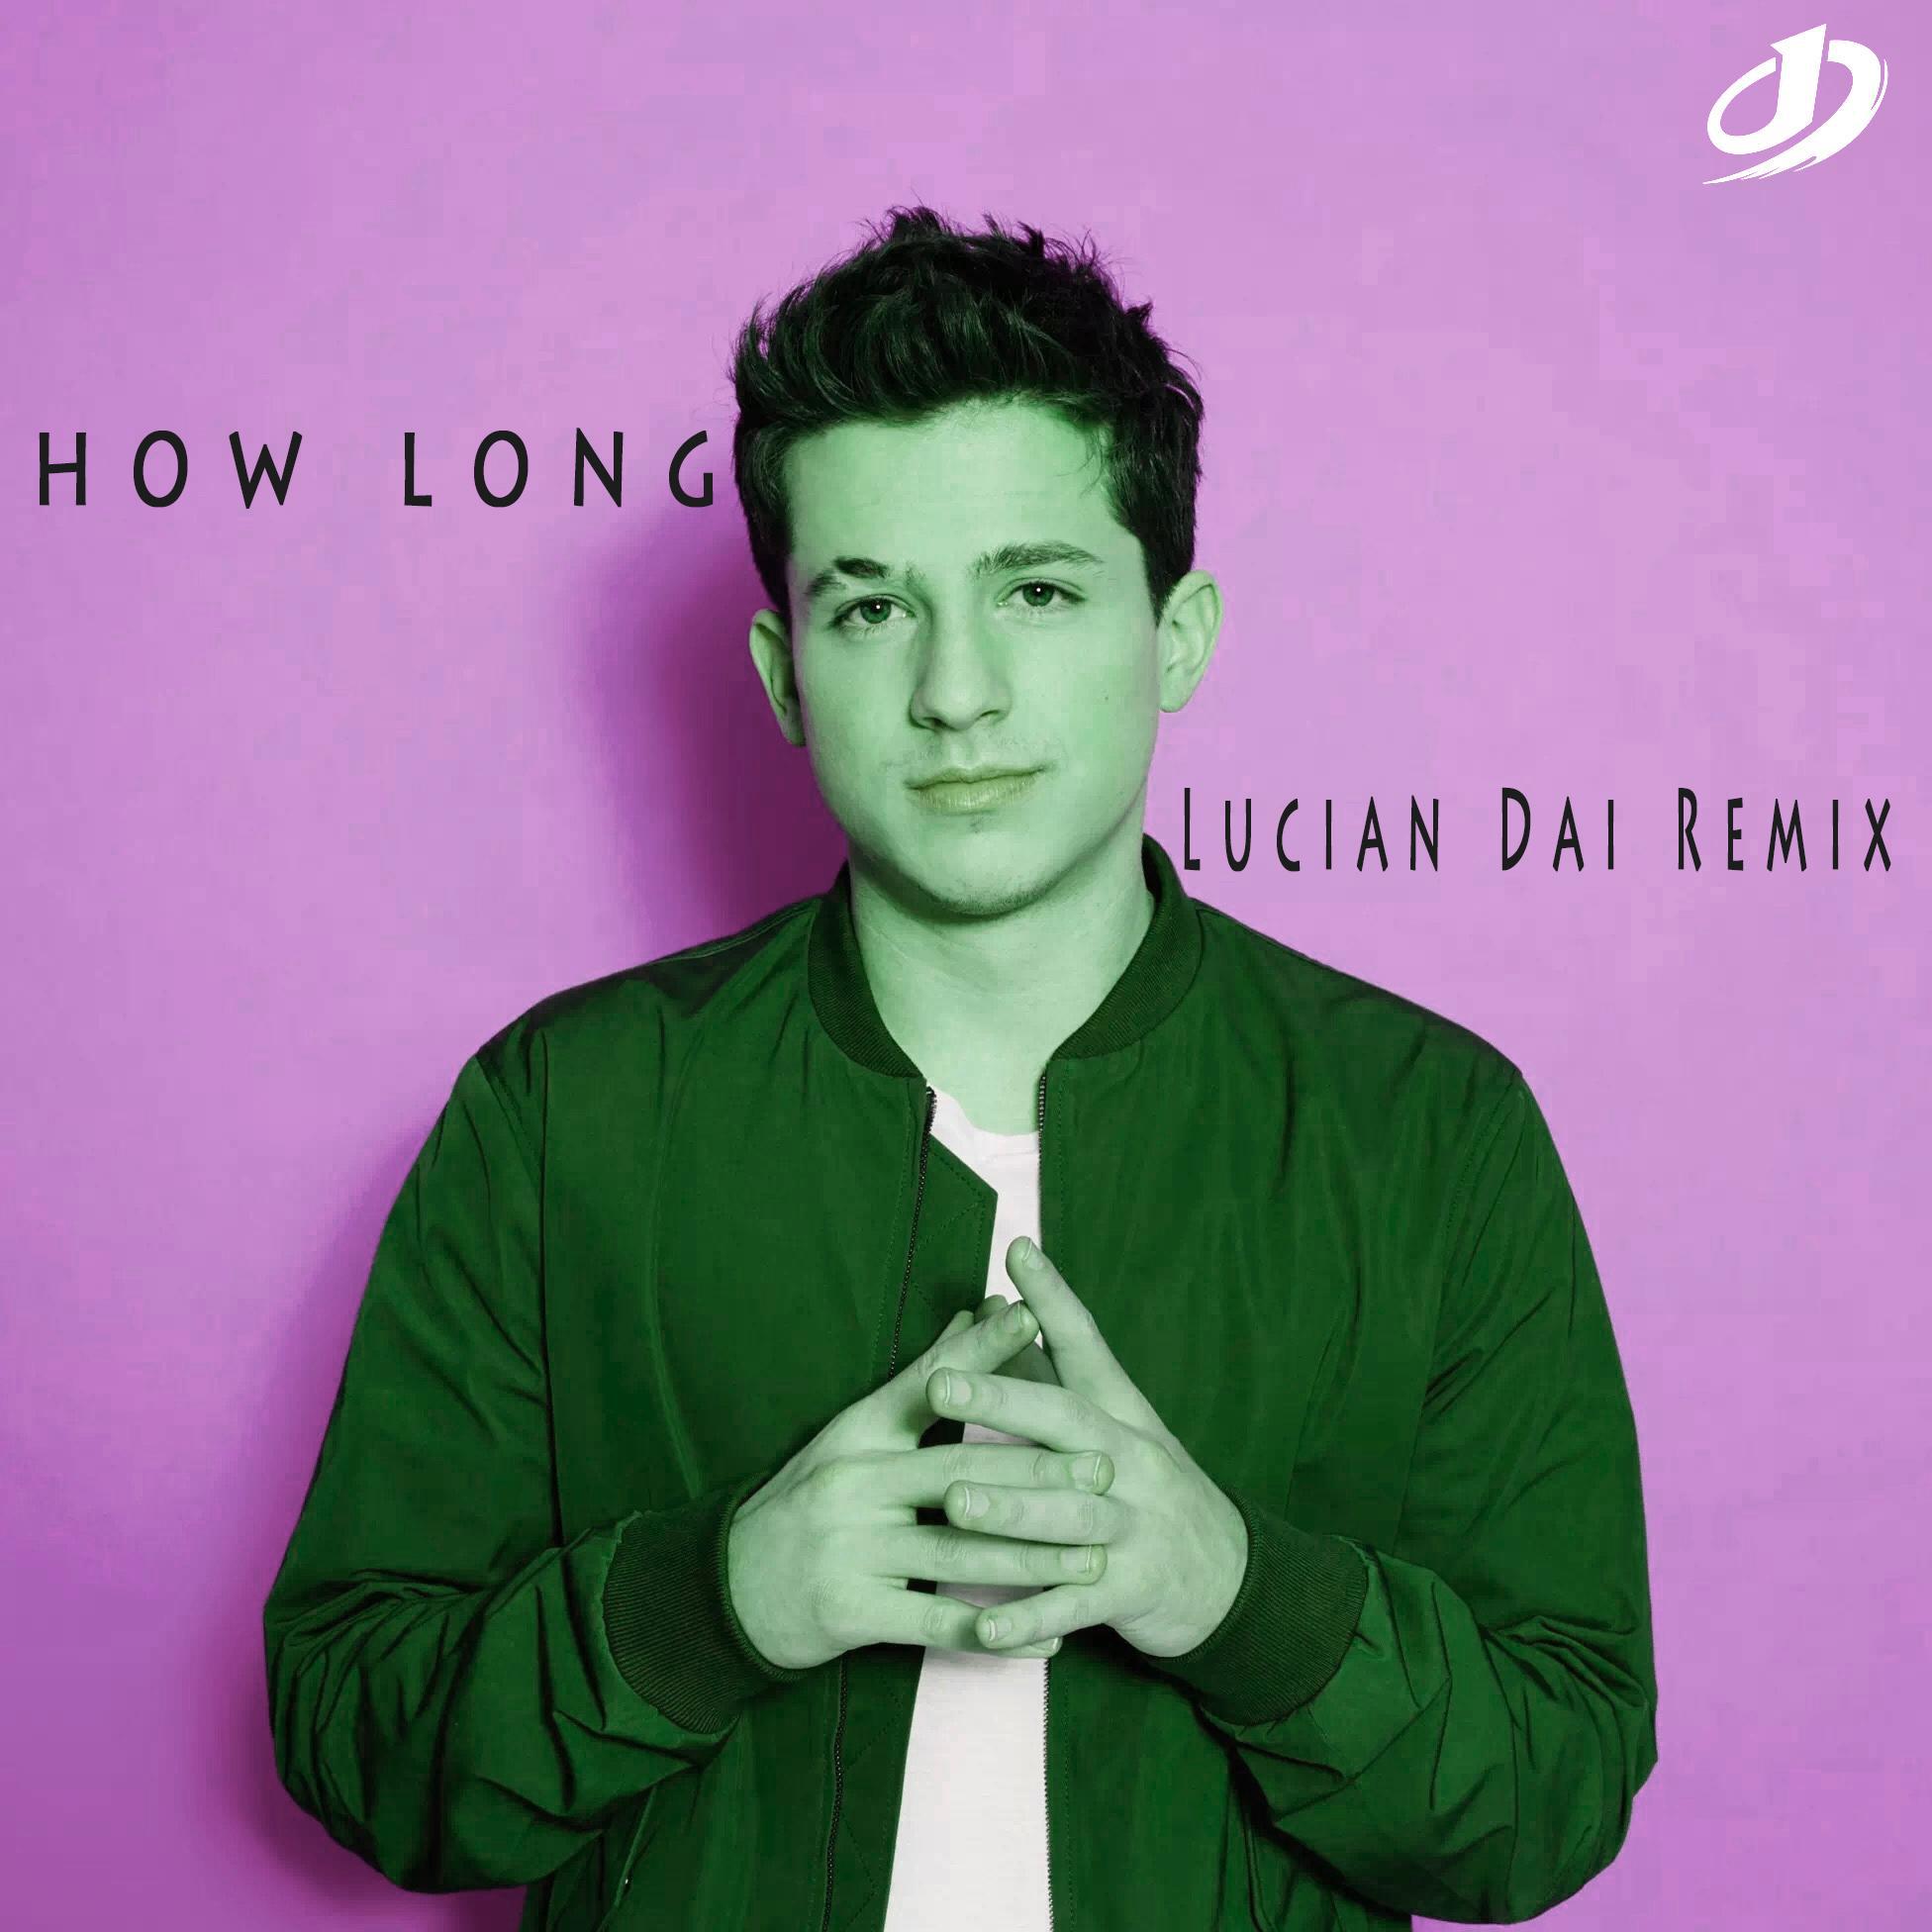 Charlie PuthHow Long VOI. 2 dai rong xuan Lucian  Dai  Charlie Puth remix